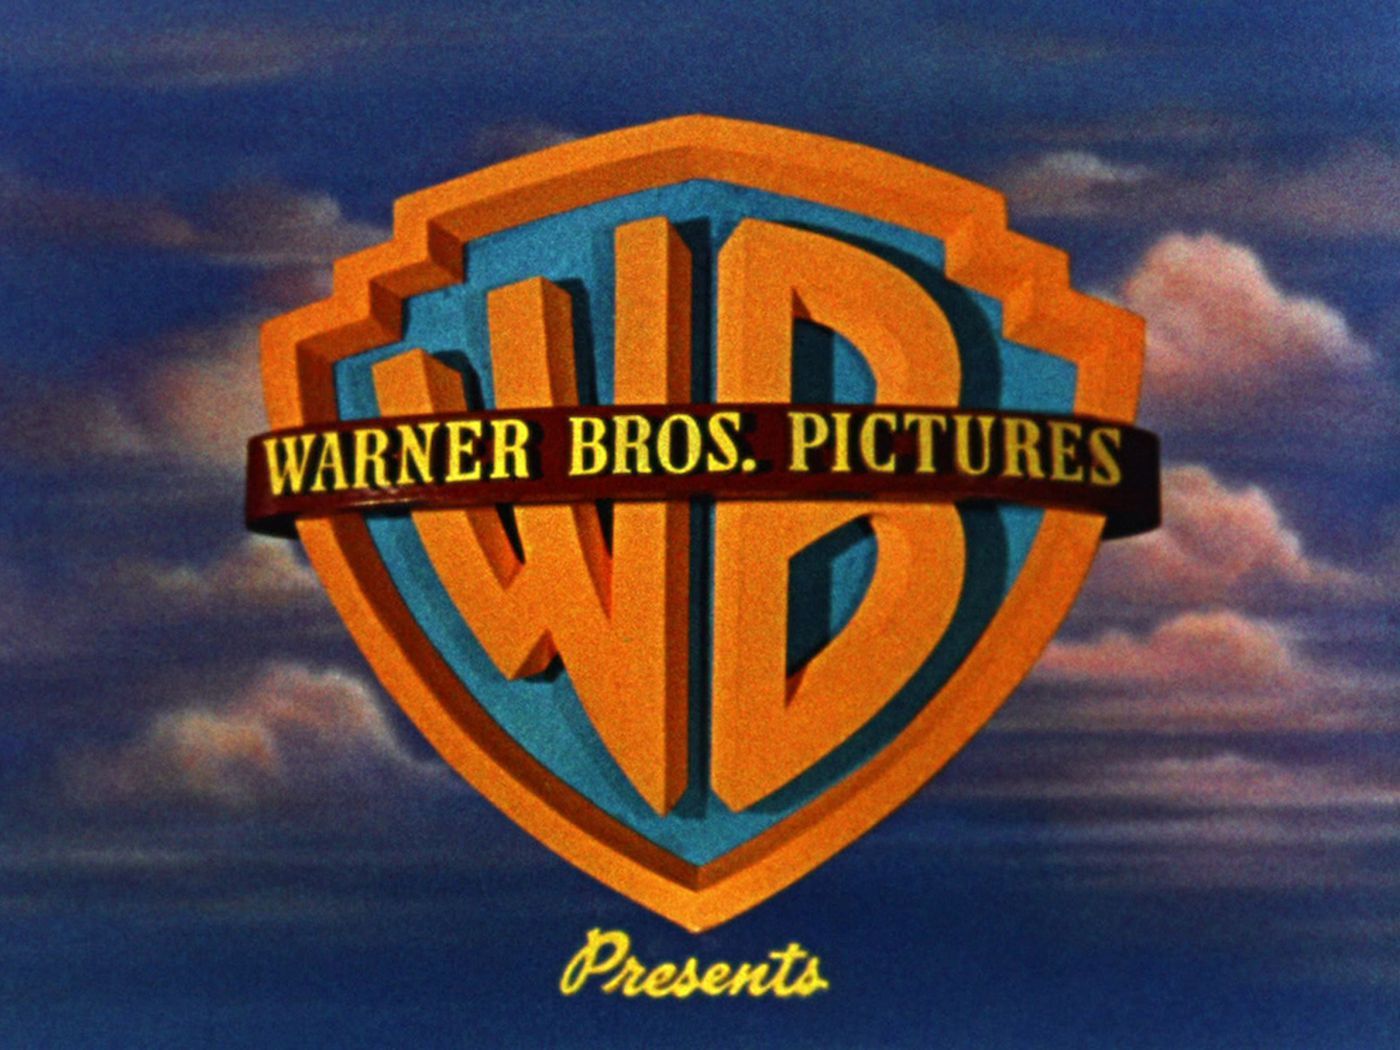 See the iconic Warner Bros. logo morph over a century of movies